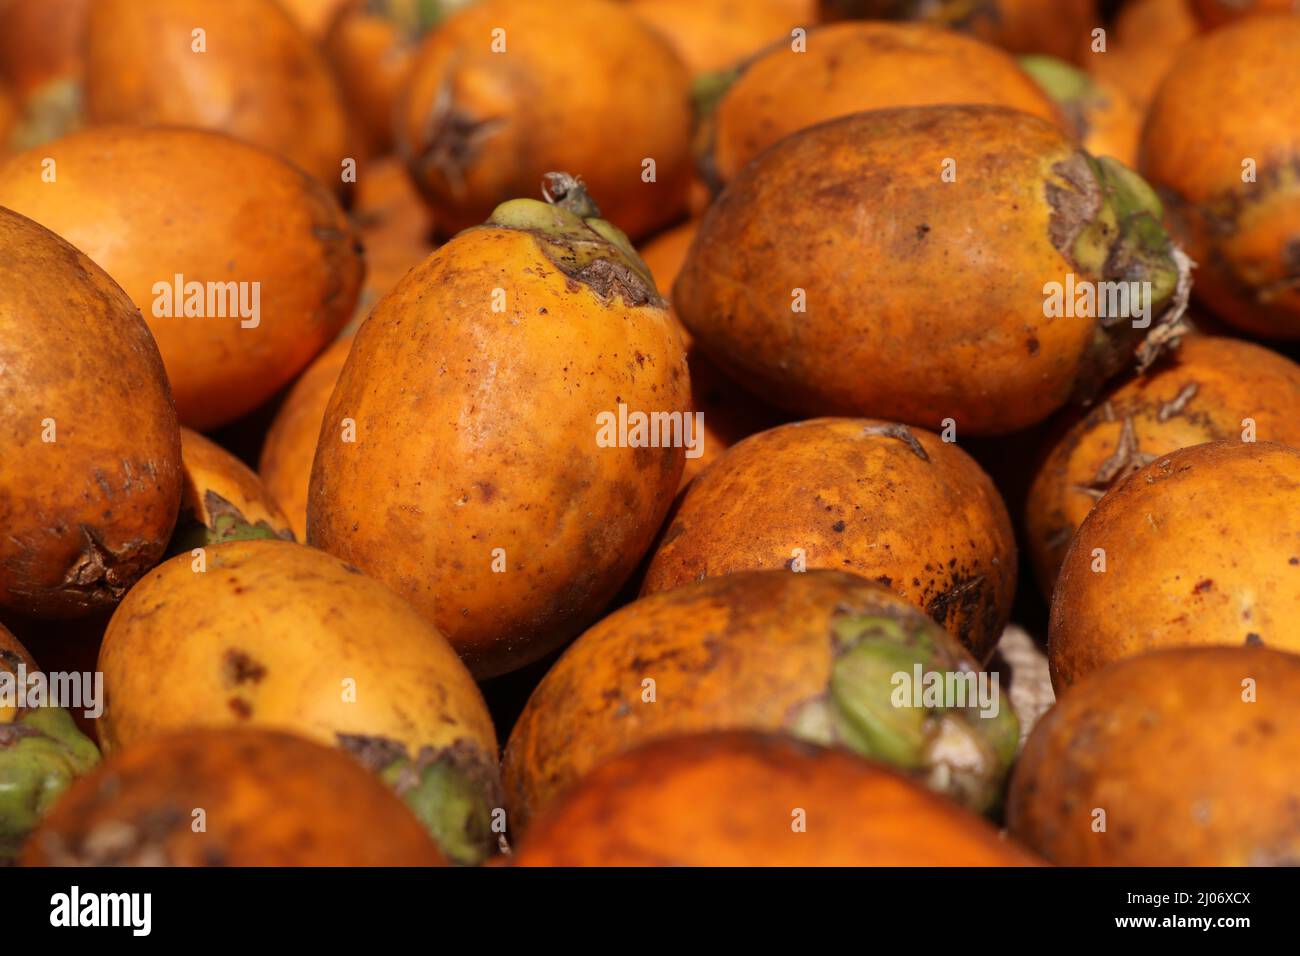 Arecanut or betel nut after harvesting from its trees kept in the sun for drying Stock Photo